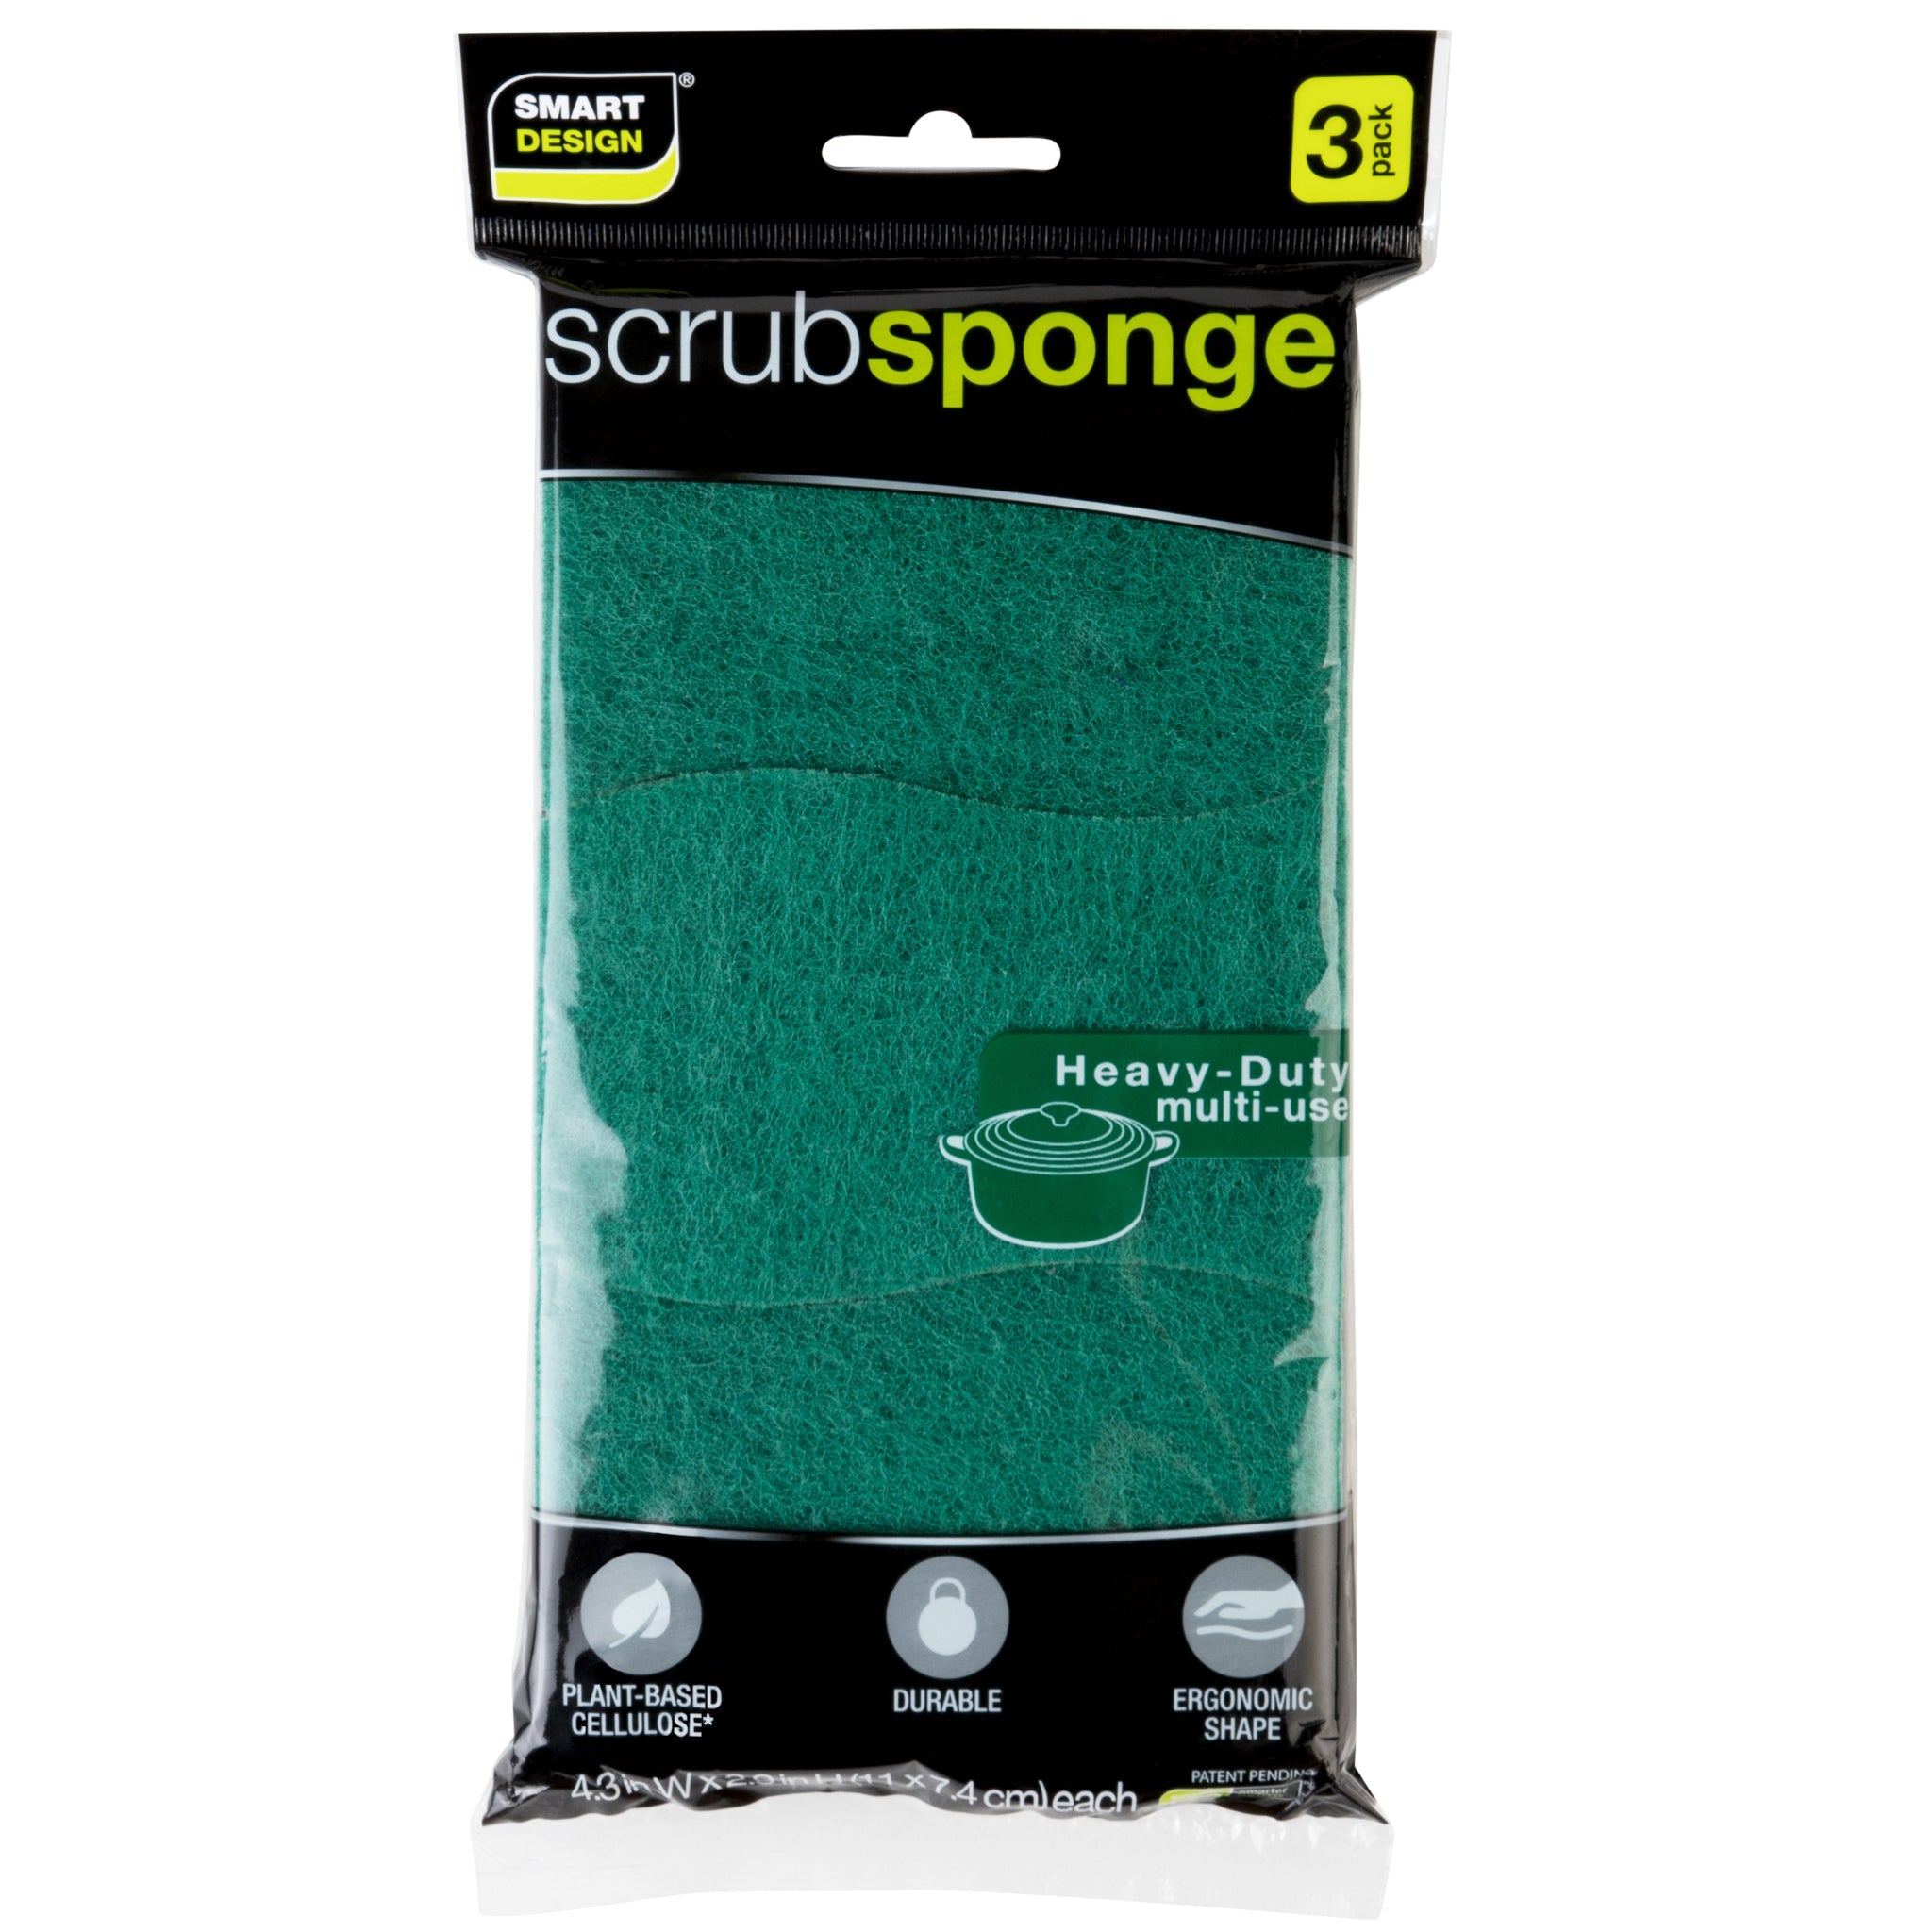 Nylon Green Dishwashing Scrubber, For Cleaning, Pad